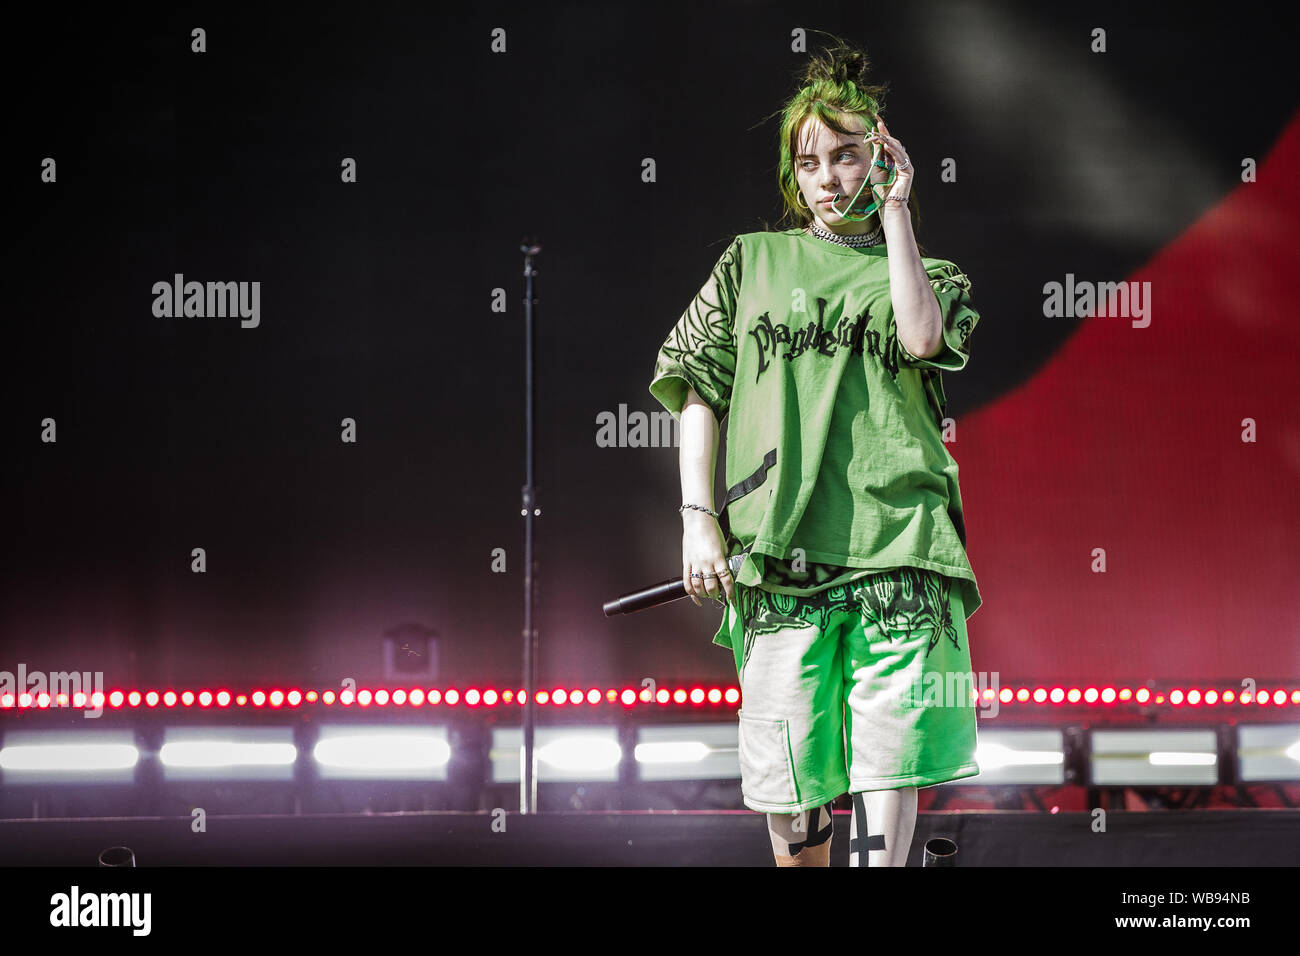 Billie Eilish's blue hair and outfit at the 2019 Reading and Leeds Festival - wide 2